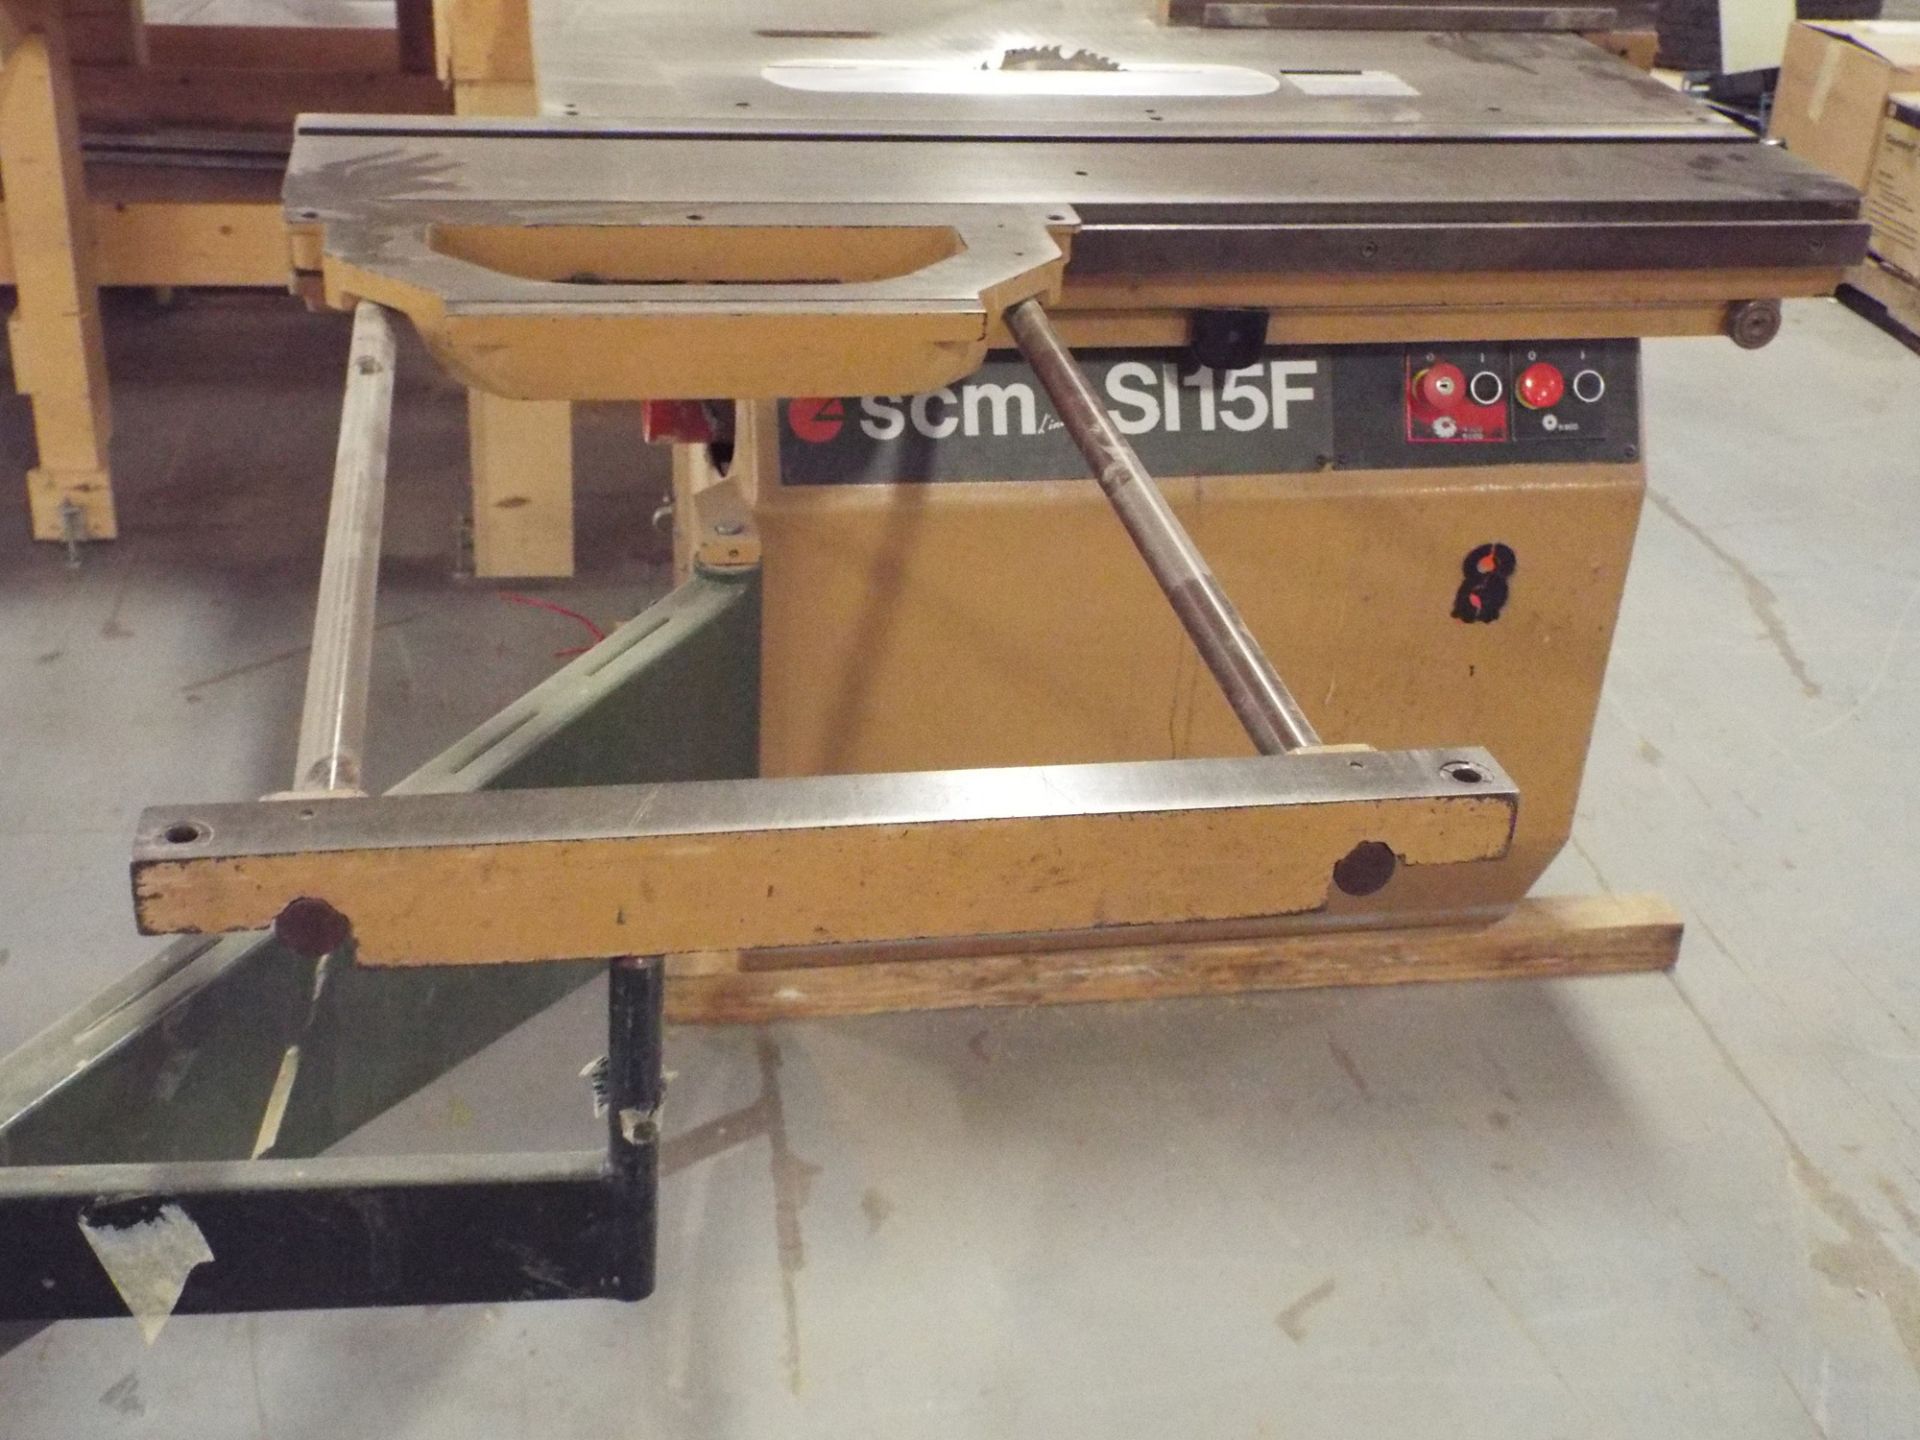 SCM SI15 F SLIDING TABLE SAW WITH 400MM MAX. BLADE DIAMETER, TRAVELS 28", S/N: AB 14454 - Image 5 of 5